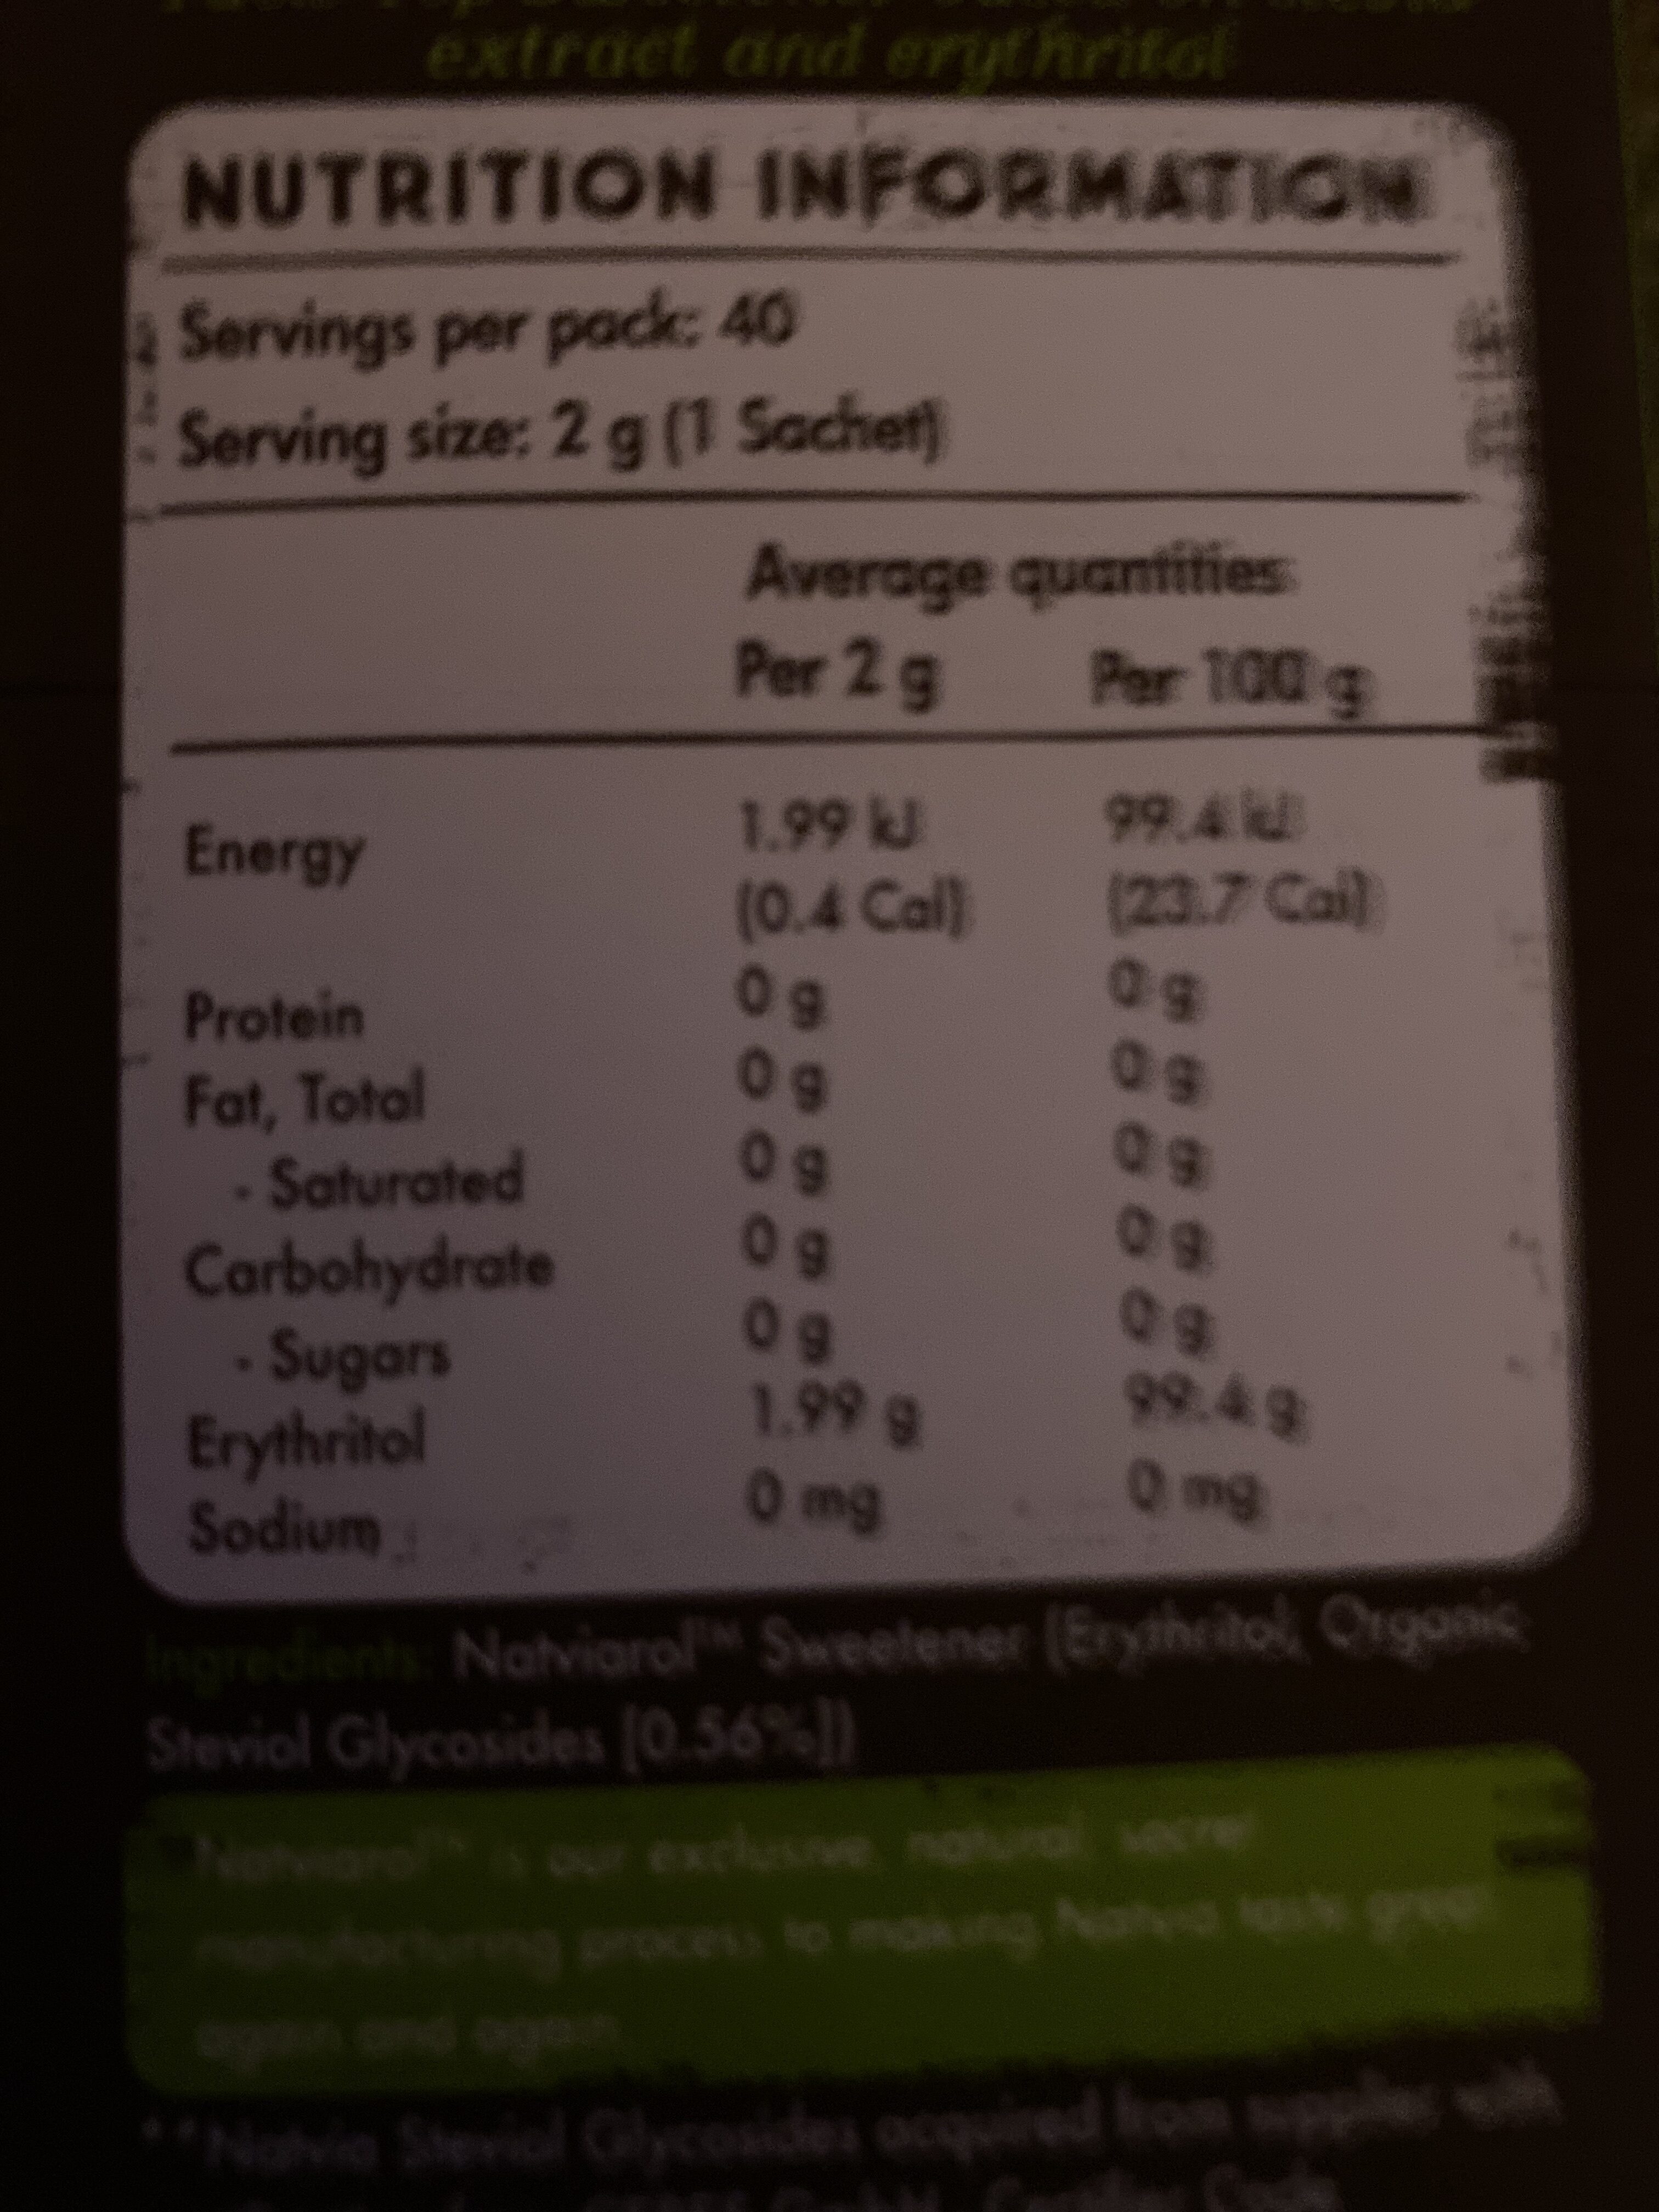 NatVia The 100% Natural Sweetener (organic) - Nutrition facts